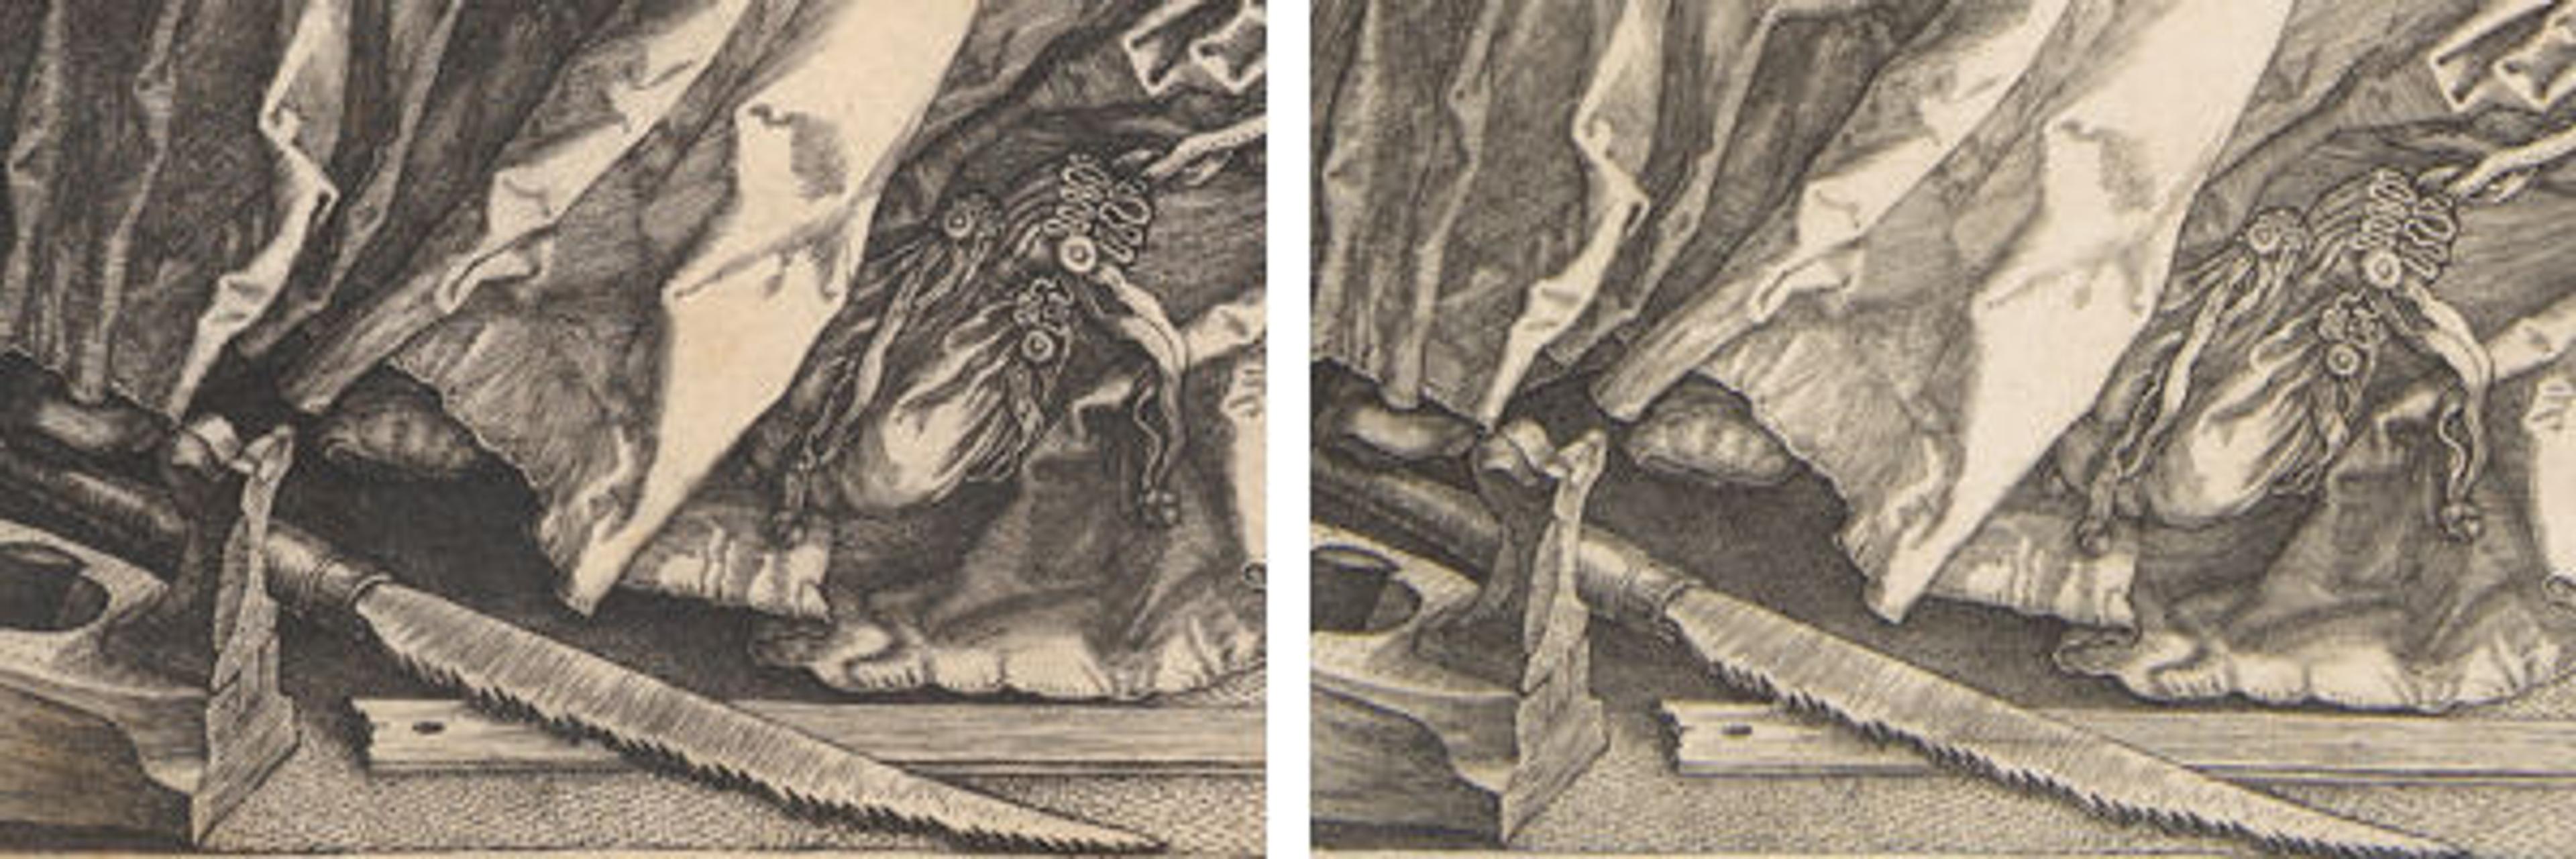 Details of two prints of Melancolia